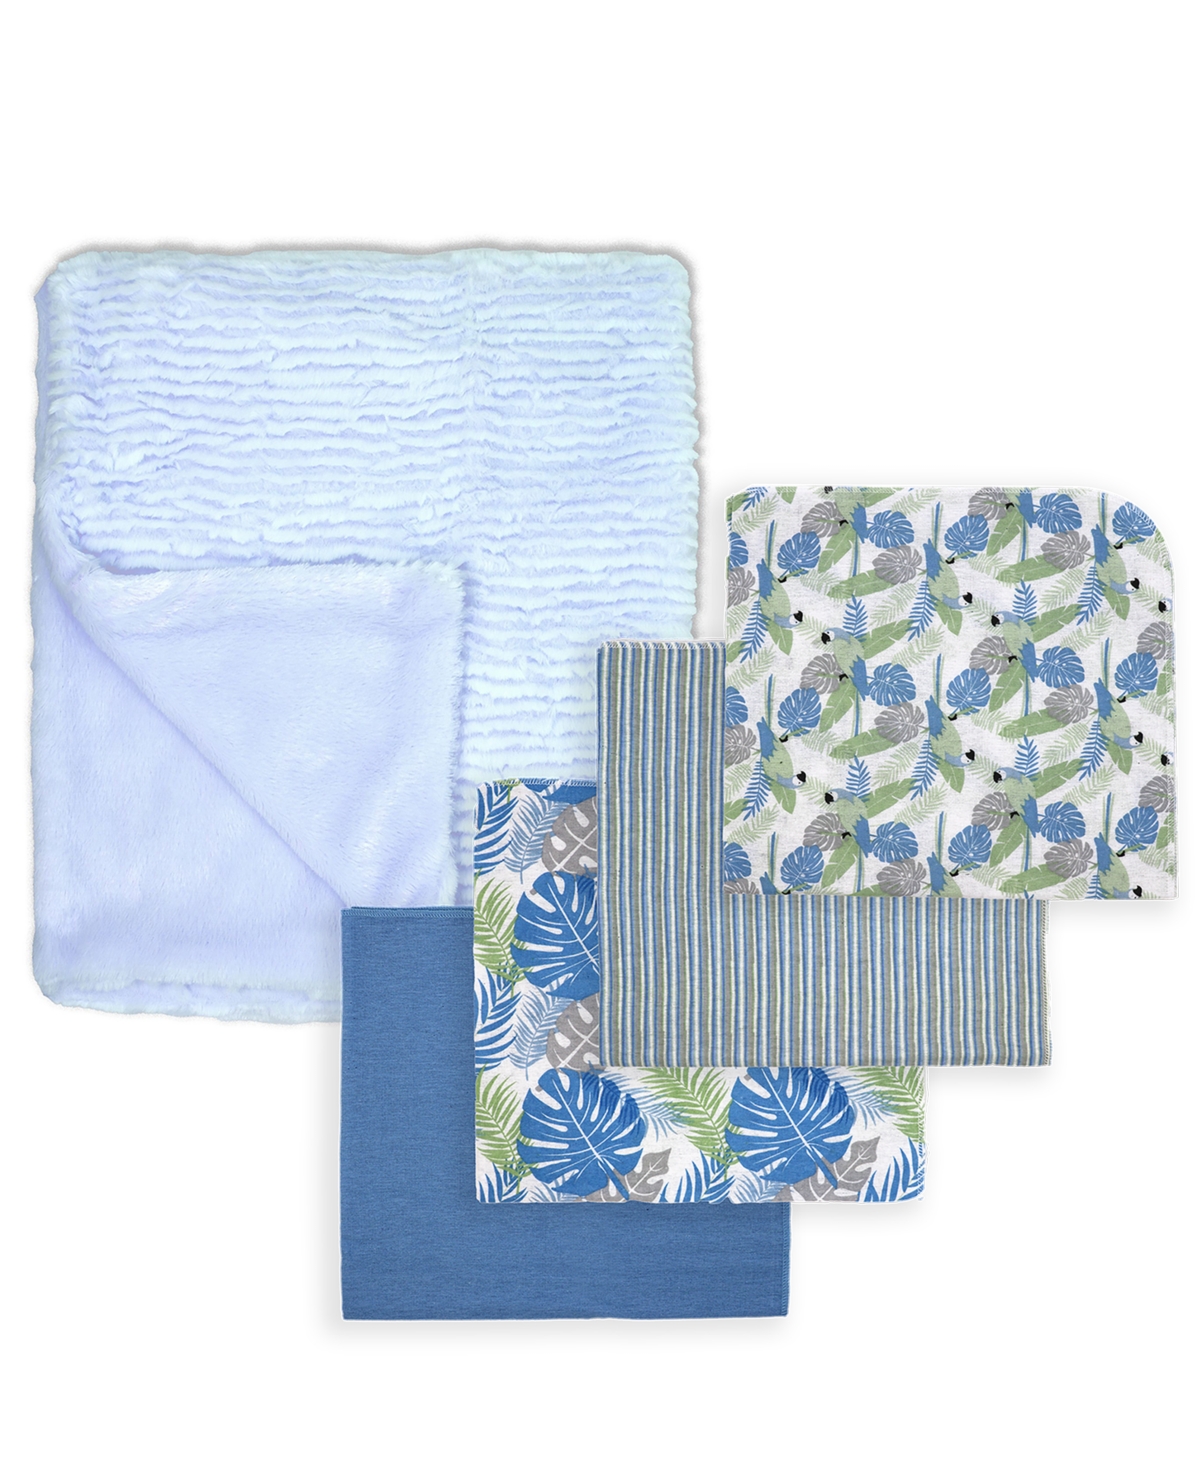 Baby Mode Tendertyme Baby Boys Tropical Islands Baby Blankets, 5 Piece Gift Set In Blue